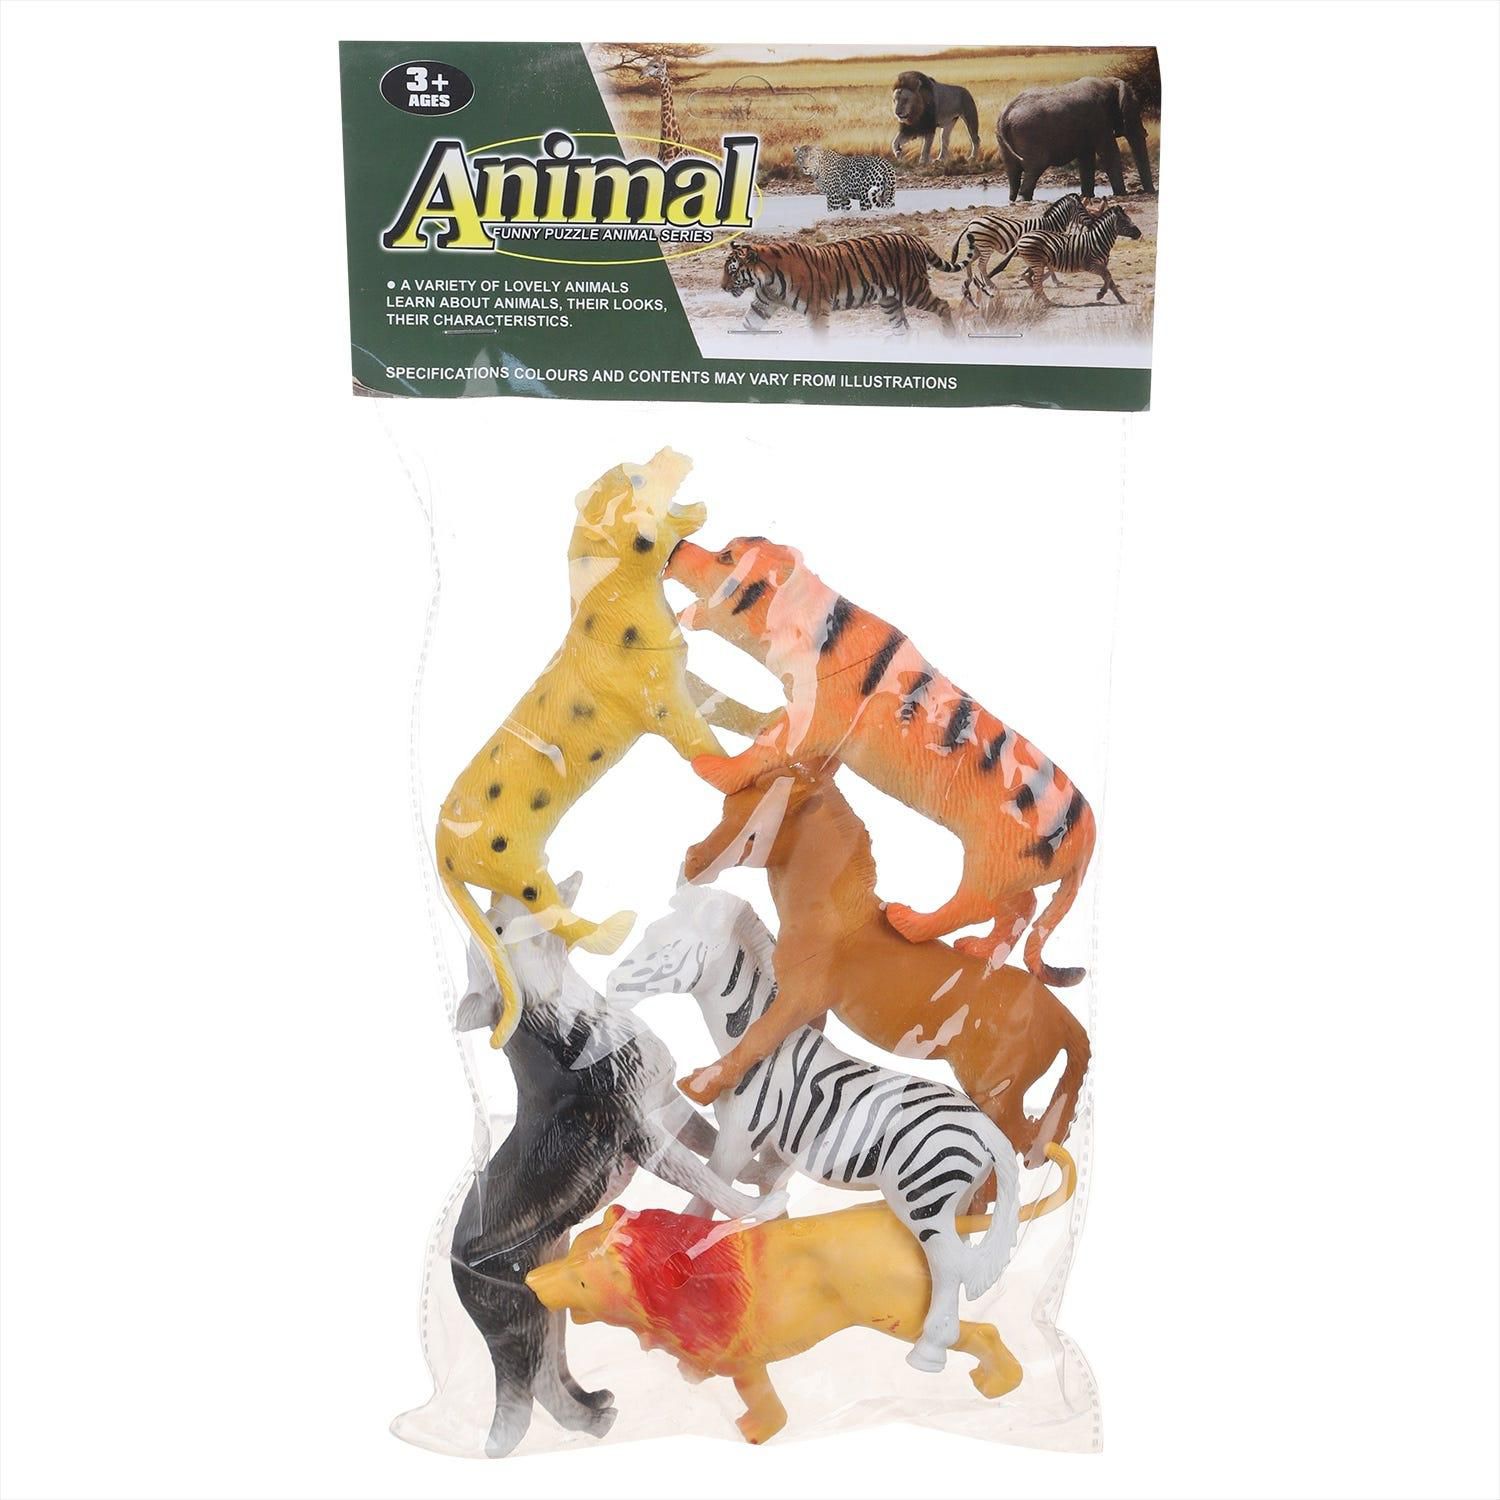 Get Animal Farm Toy for Kids, 6 Pieces - MultiColor with best offers | Raneen.com